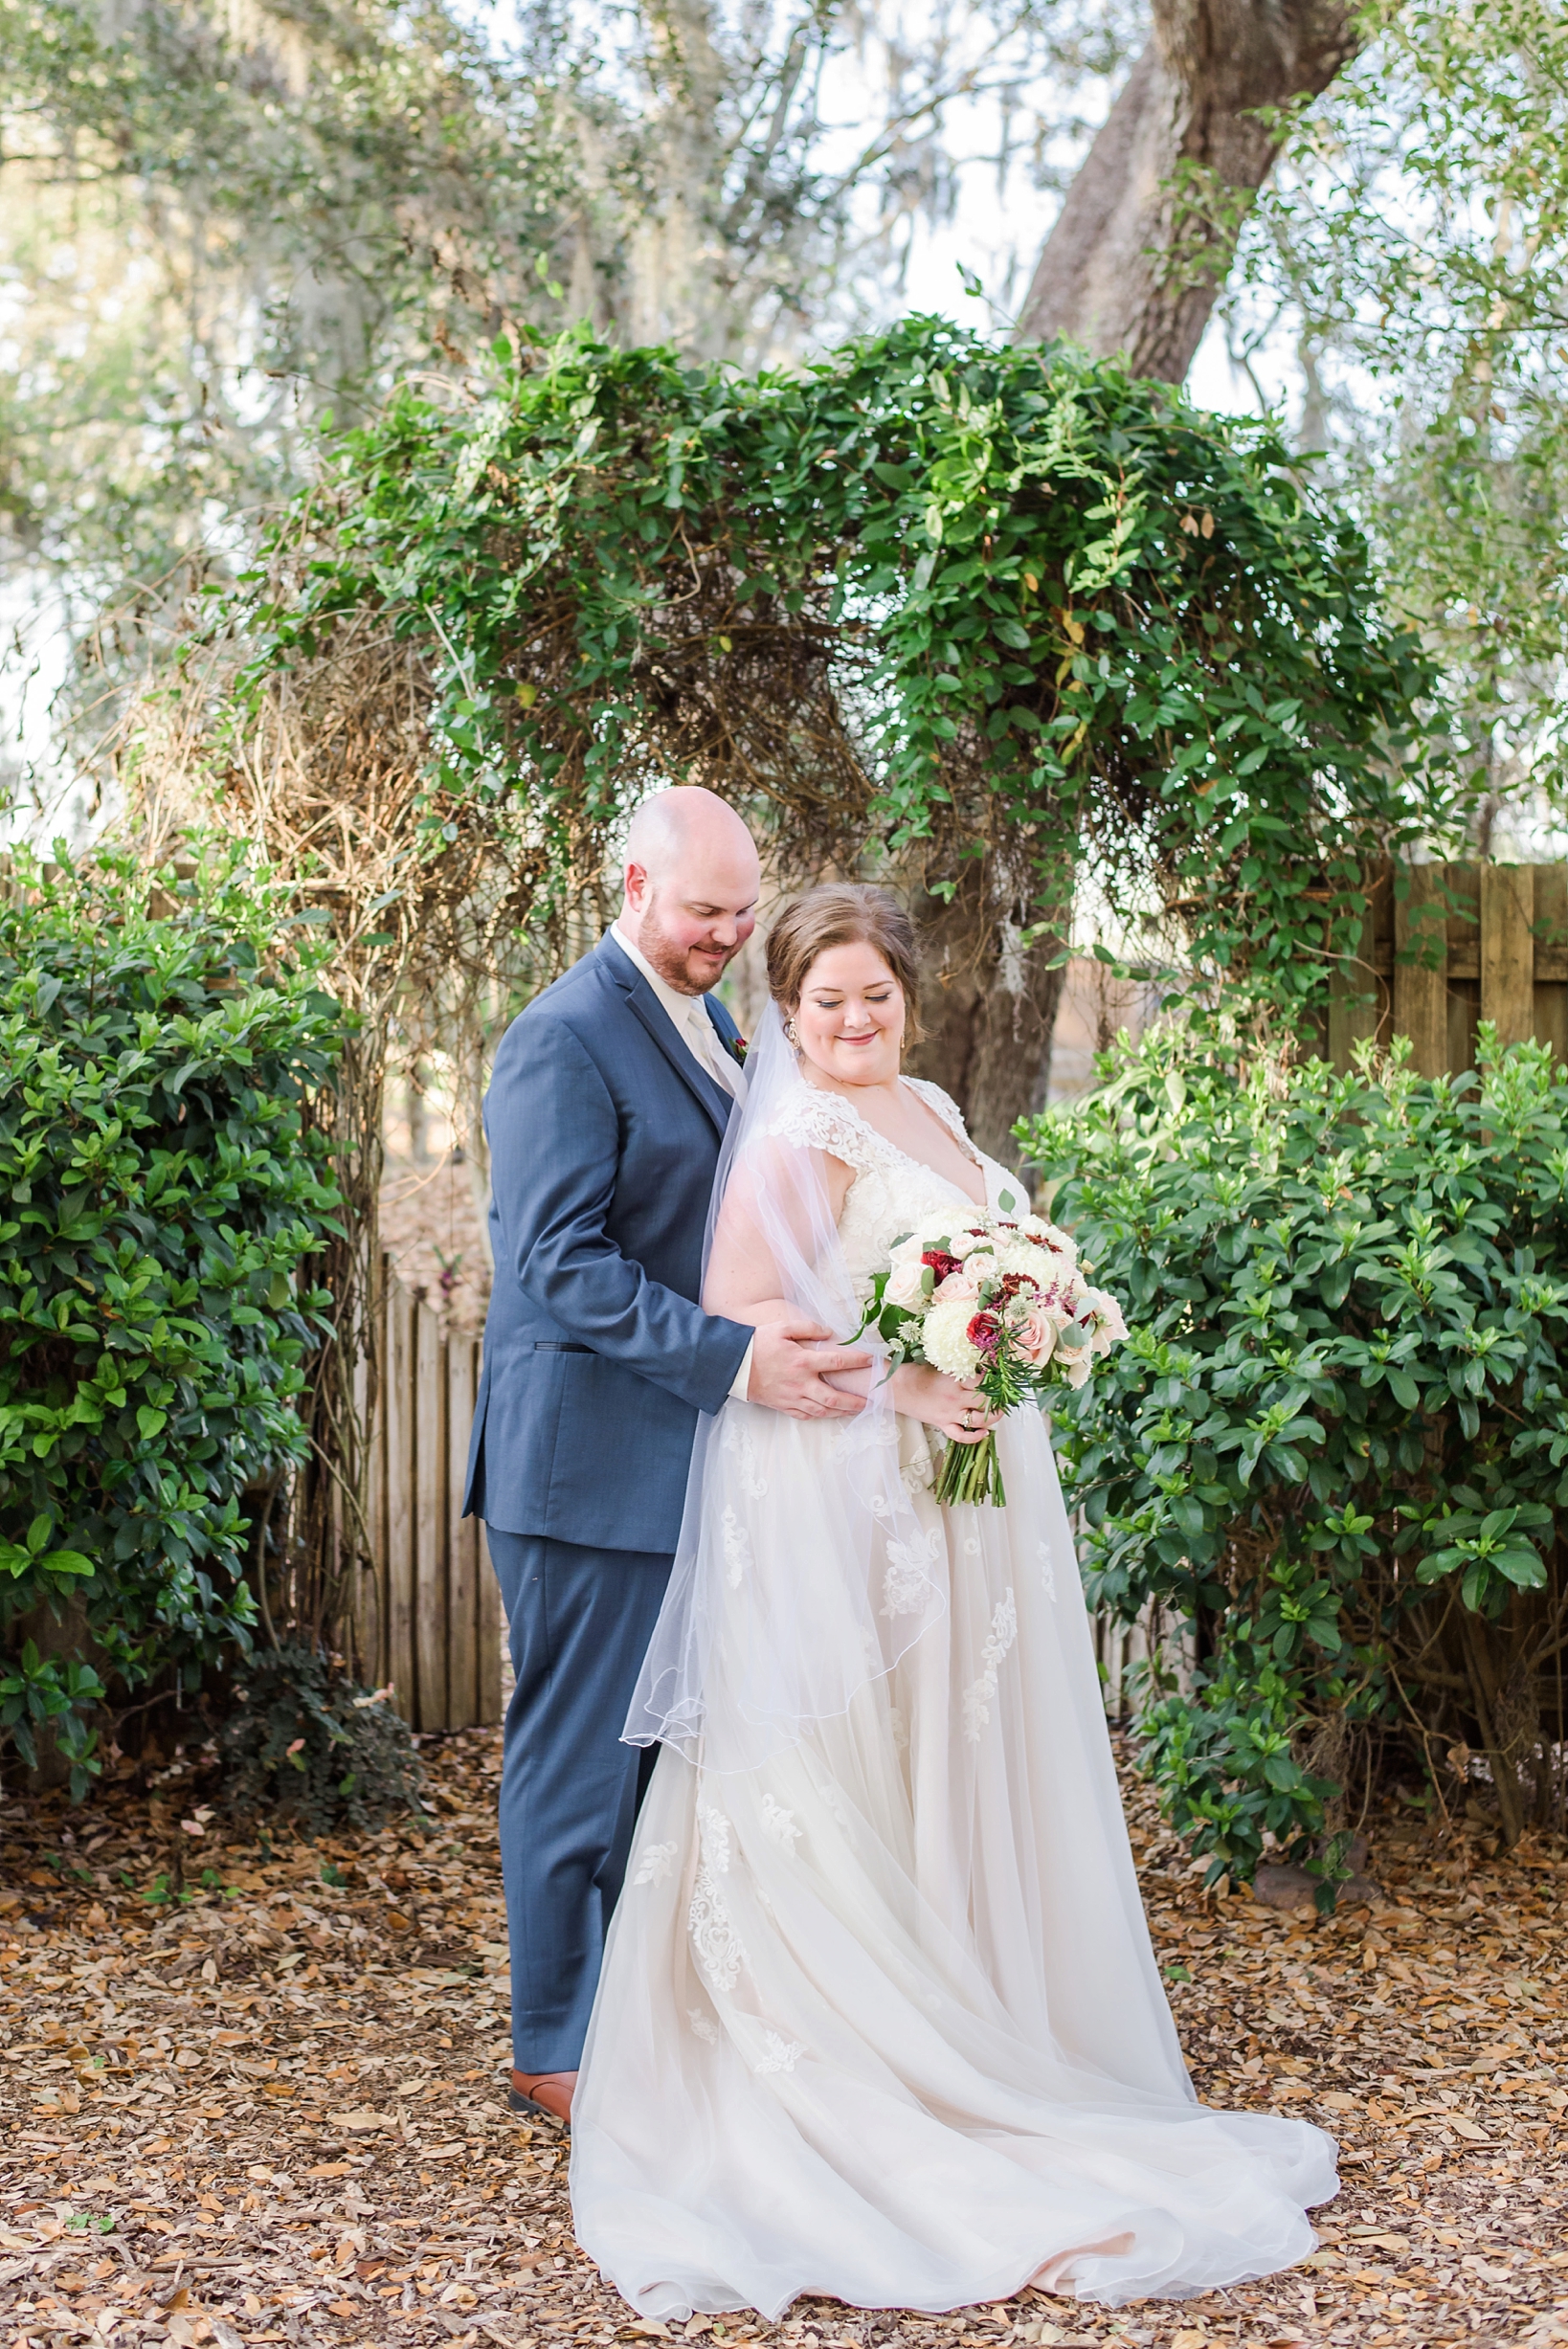 Bridal portrait of the wedding couple by Sarah & Ben Photography